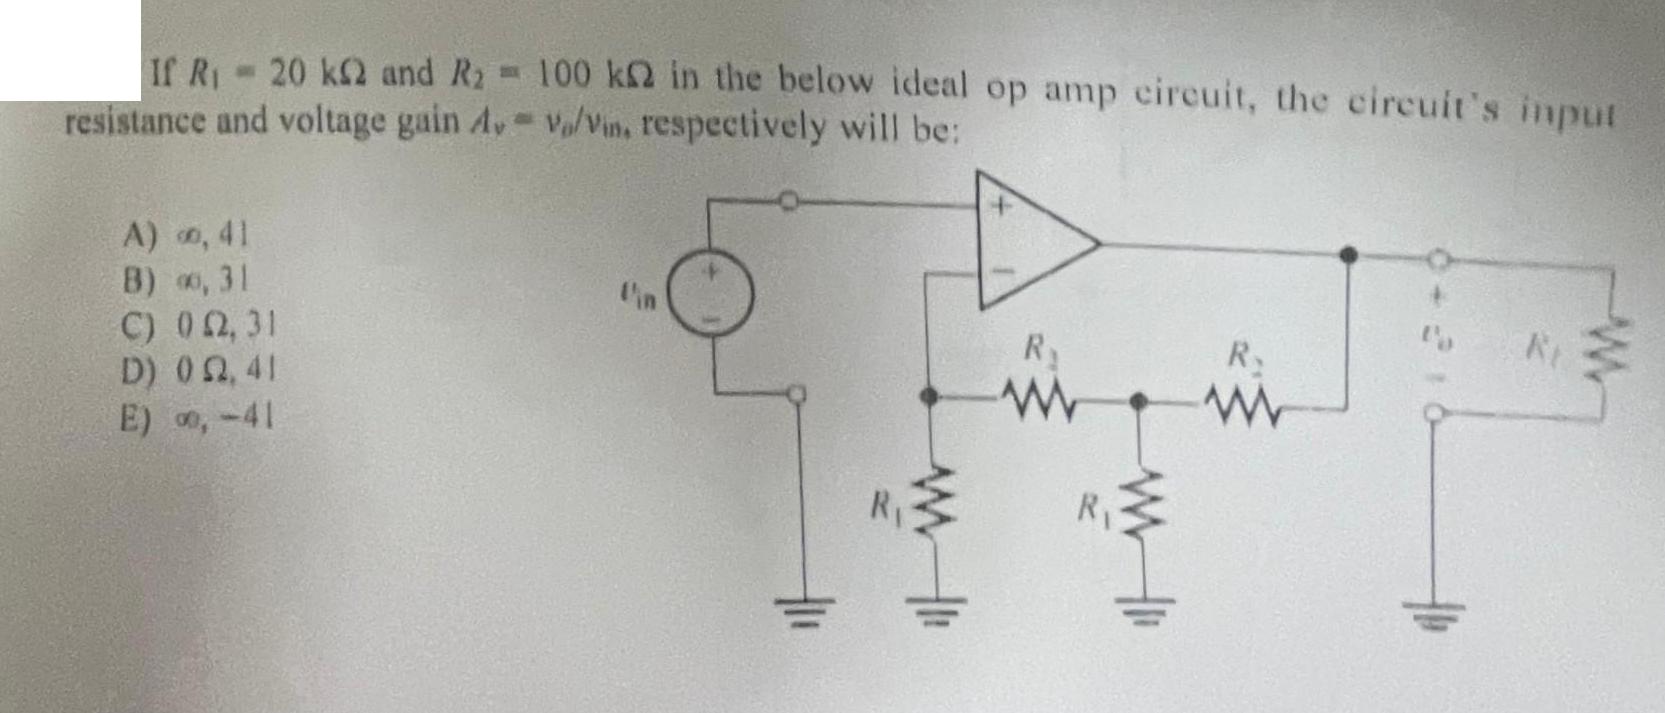 If R 20 k2 and R = resistance and voltage gain A. A) 0,41 B) 0,31 C) 02,31 D) 022,41 E) , -41 100 k2 in the